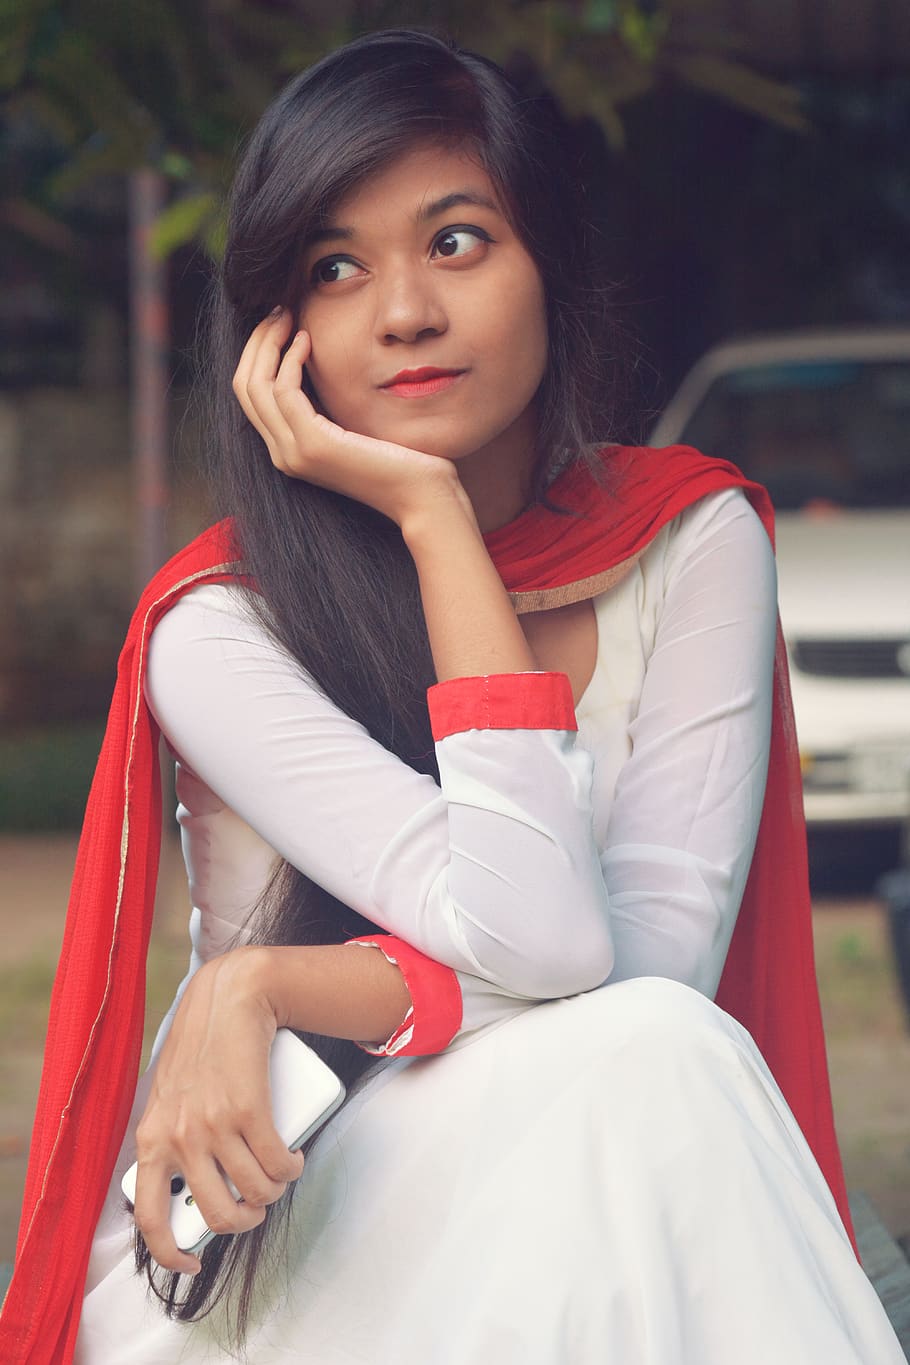 Woman Wearing White Long-sleeved Dress And Red Scarf, bangladesh